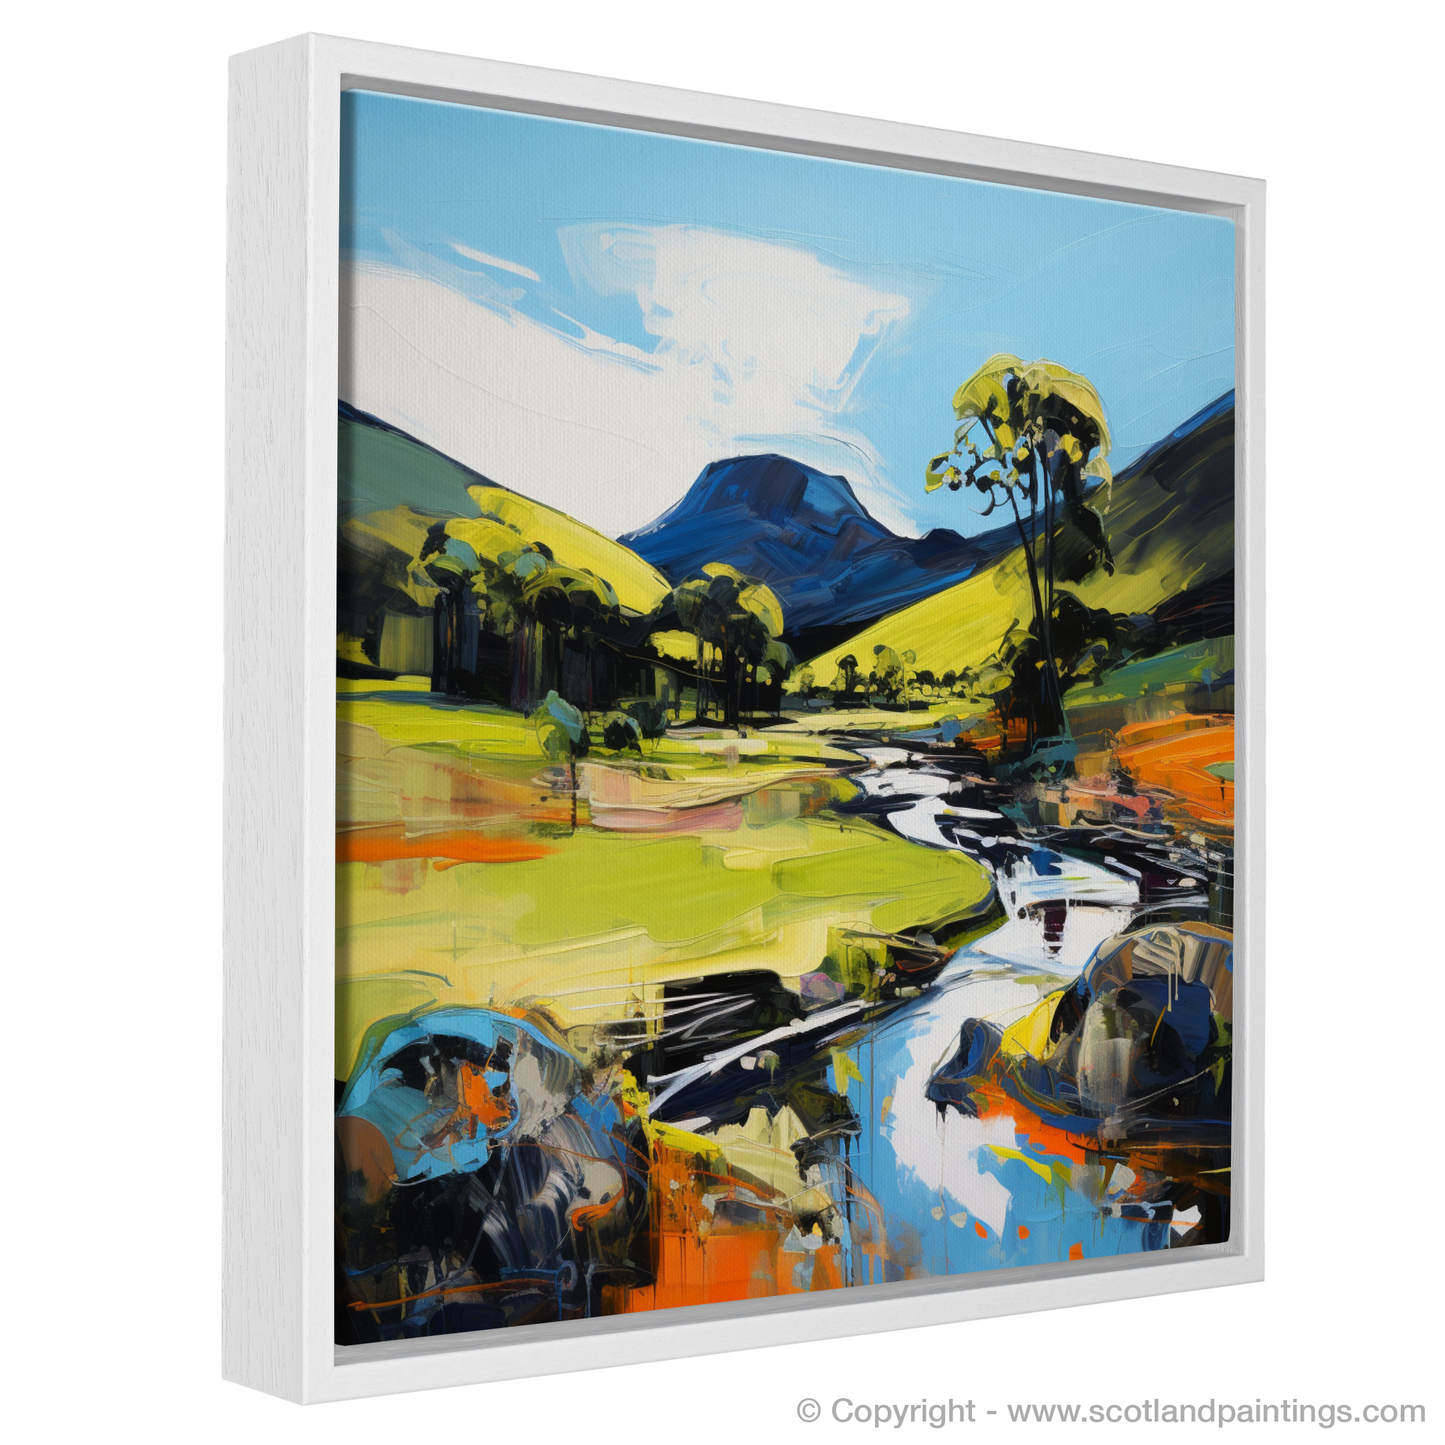 Painting and Art Print of Glen Esk, Angus in summer entitled "Glen Esk in Summer Expression: A Vibrant Ode to Scottish Scenery".